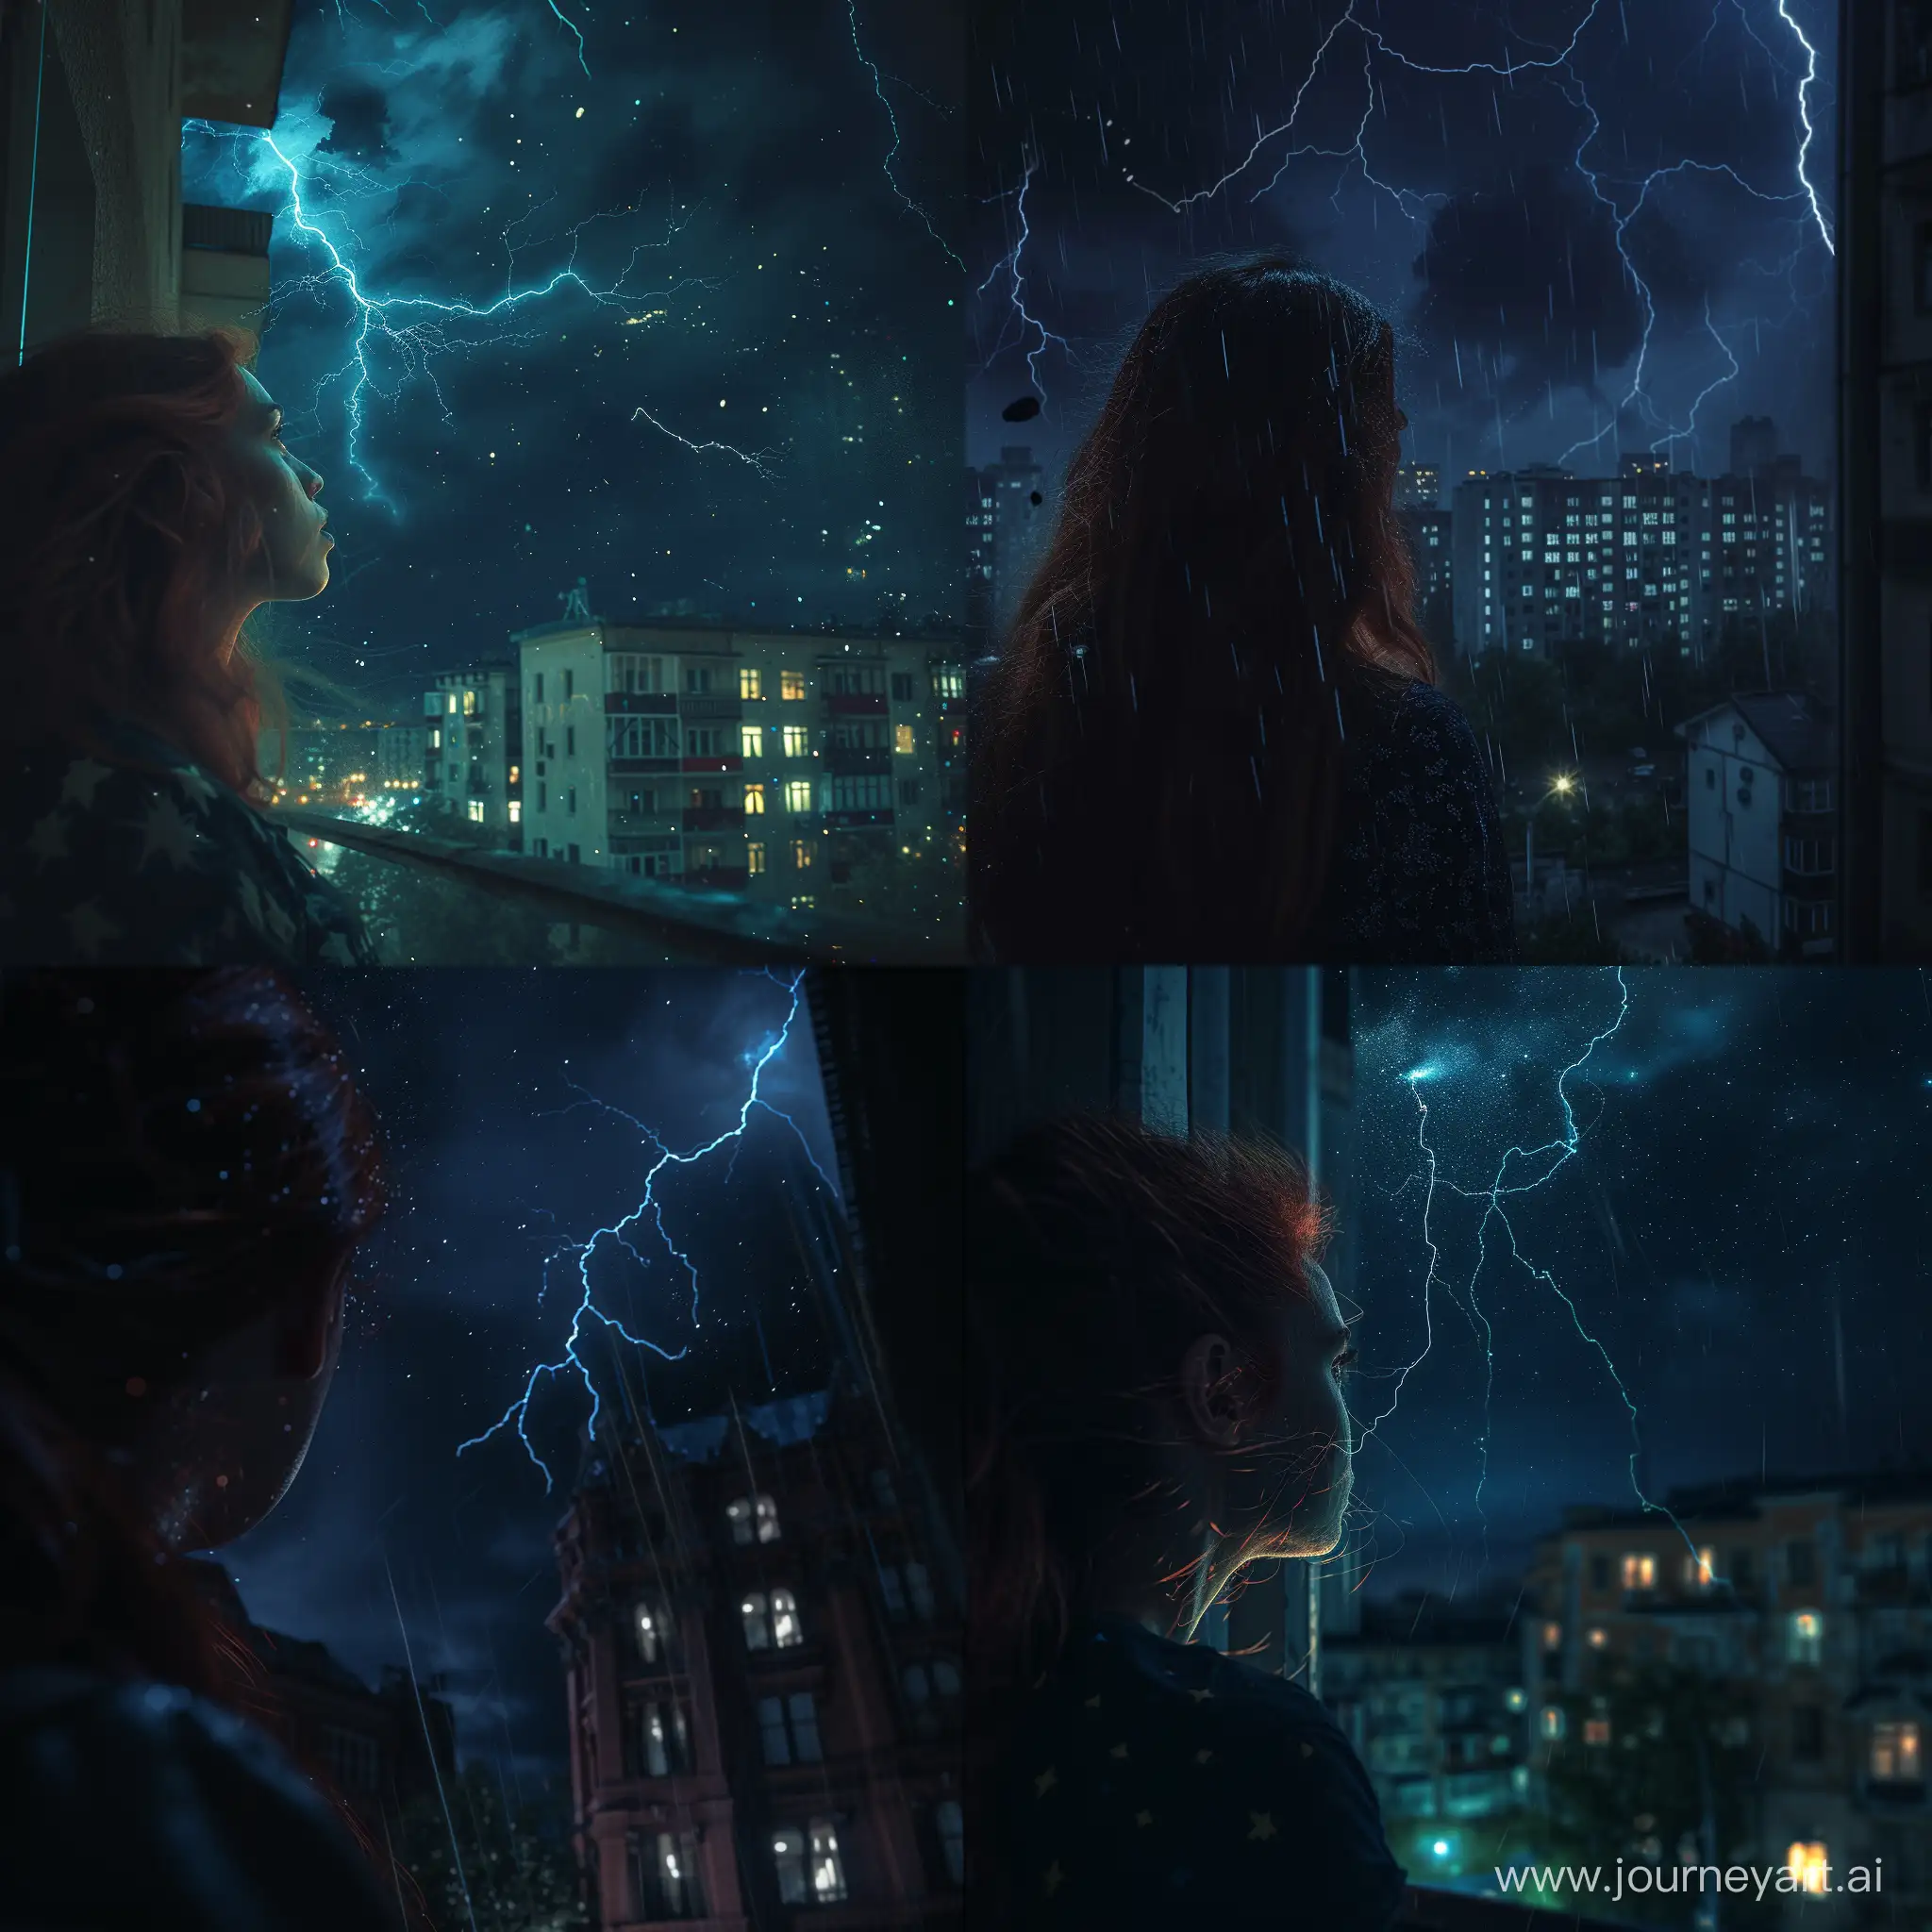  dark night, you can see stars, city, redhead is looking into skies. lightning strikes, building, motion blur, shot on arri alexa classic camera with panasonic lenses, photorealistic, artifacts of jpeg, cinematic and artful, very dark, flash on camera